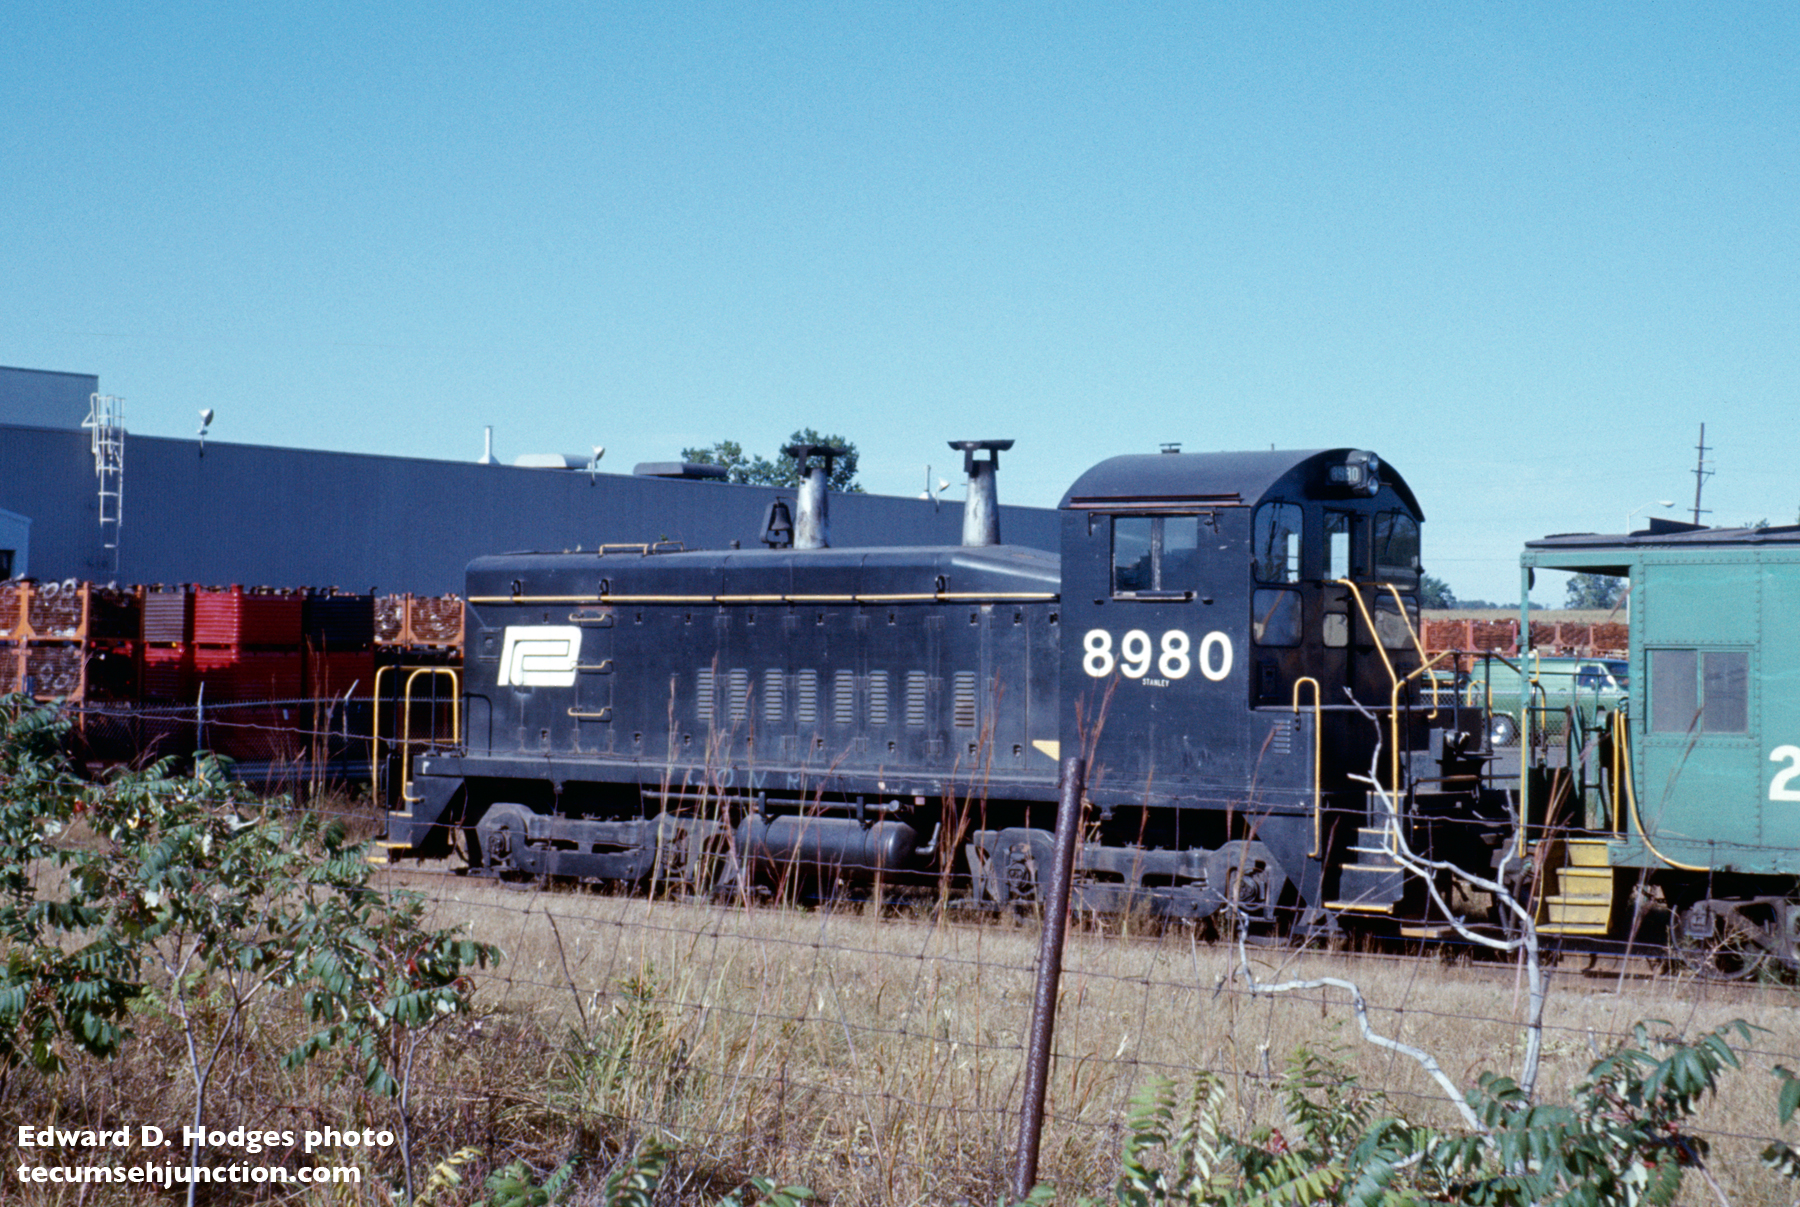 Conrail #8980 is an EMD SW-9, built for the New York Central Railroad in 1953.